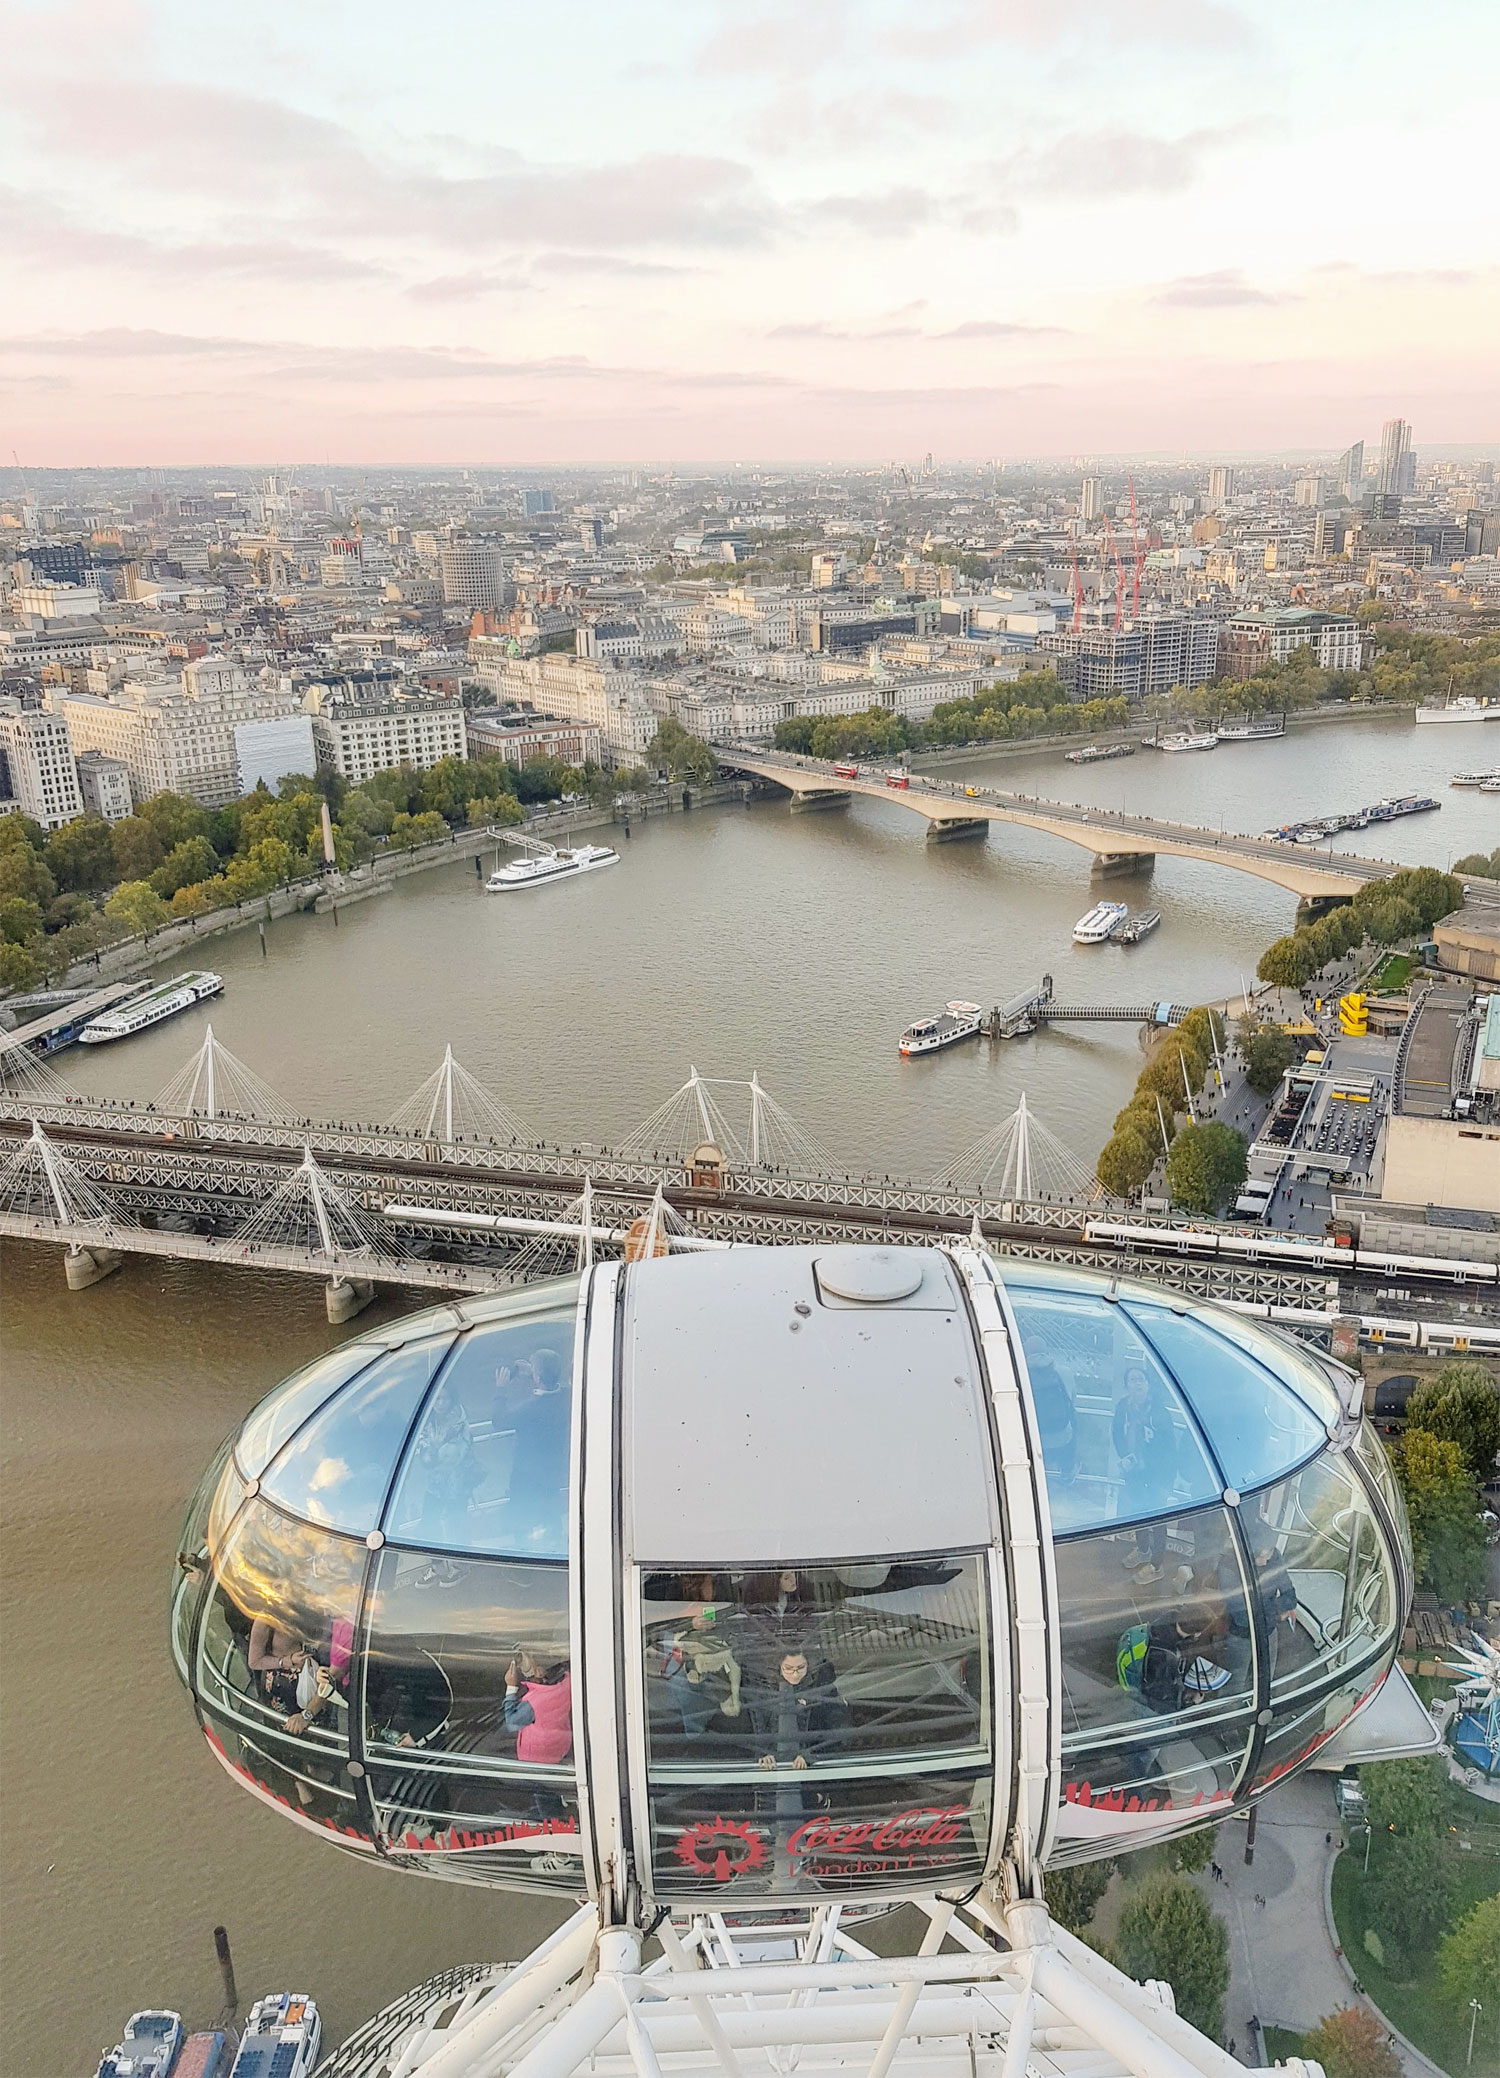 The pods of The London Eye